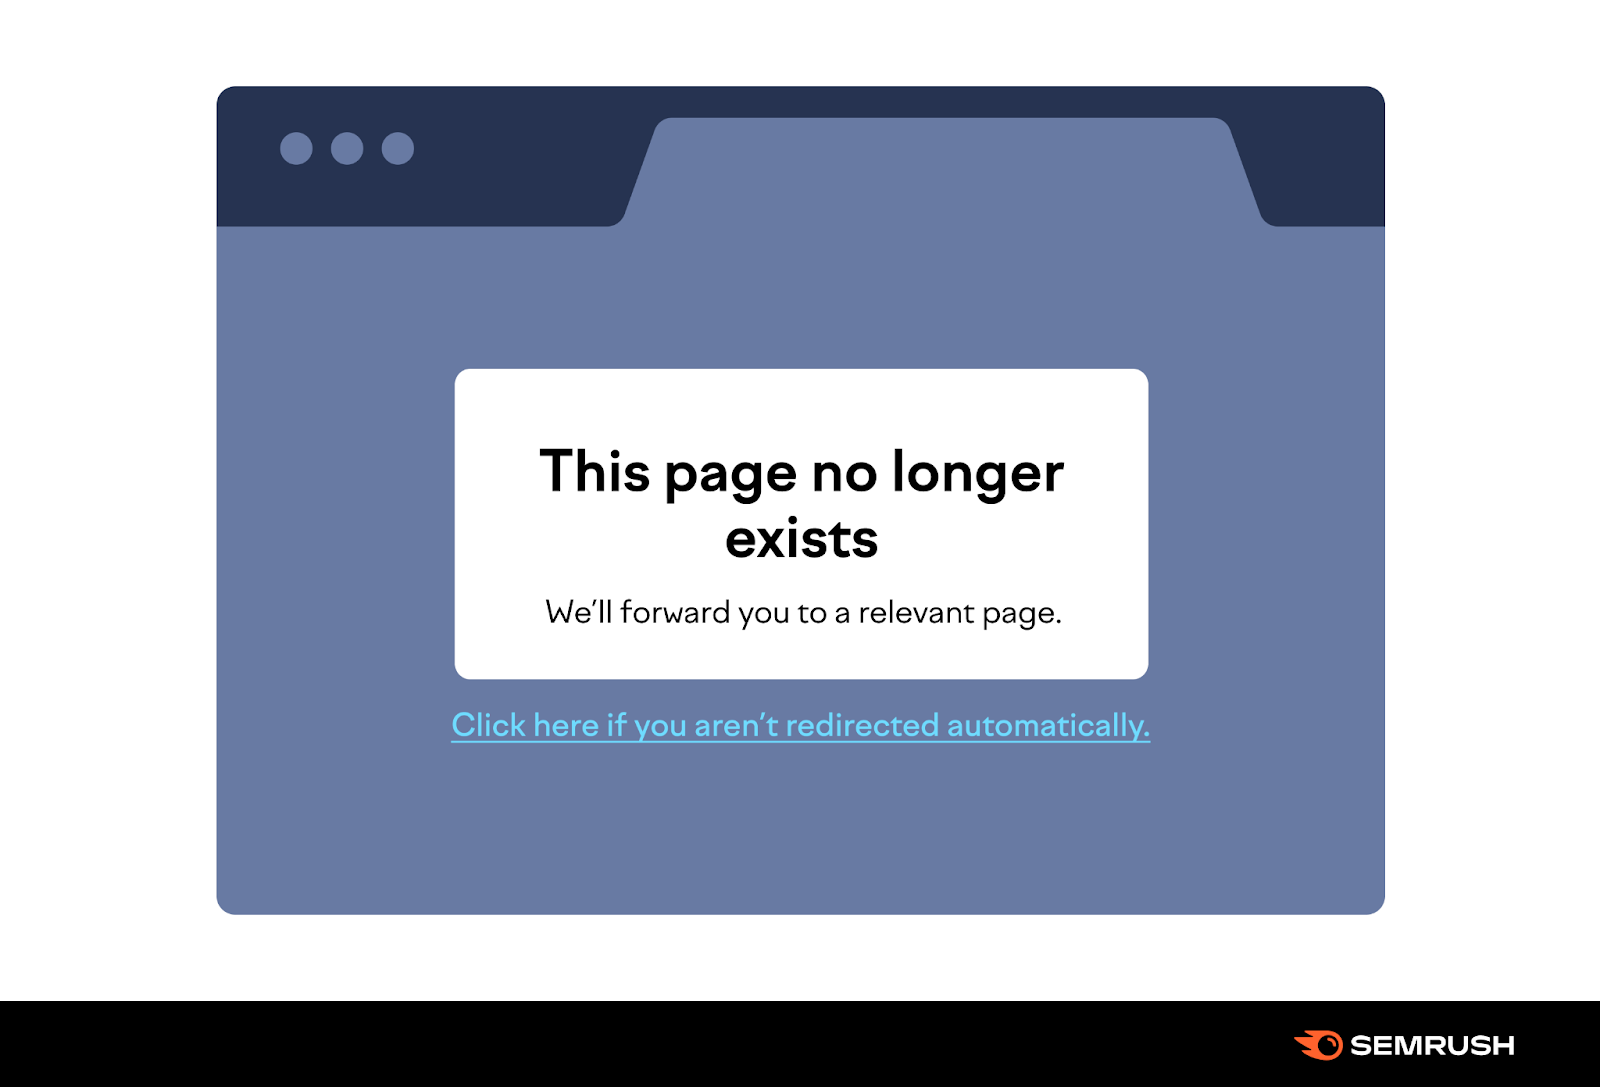 an image illustrating "This page no longer exists" page with redirect